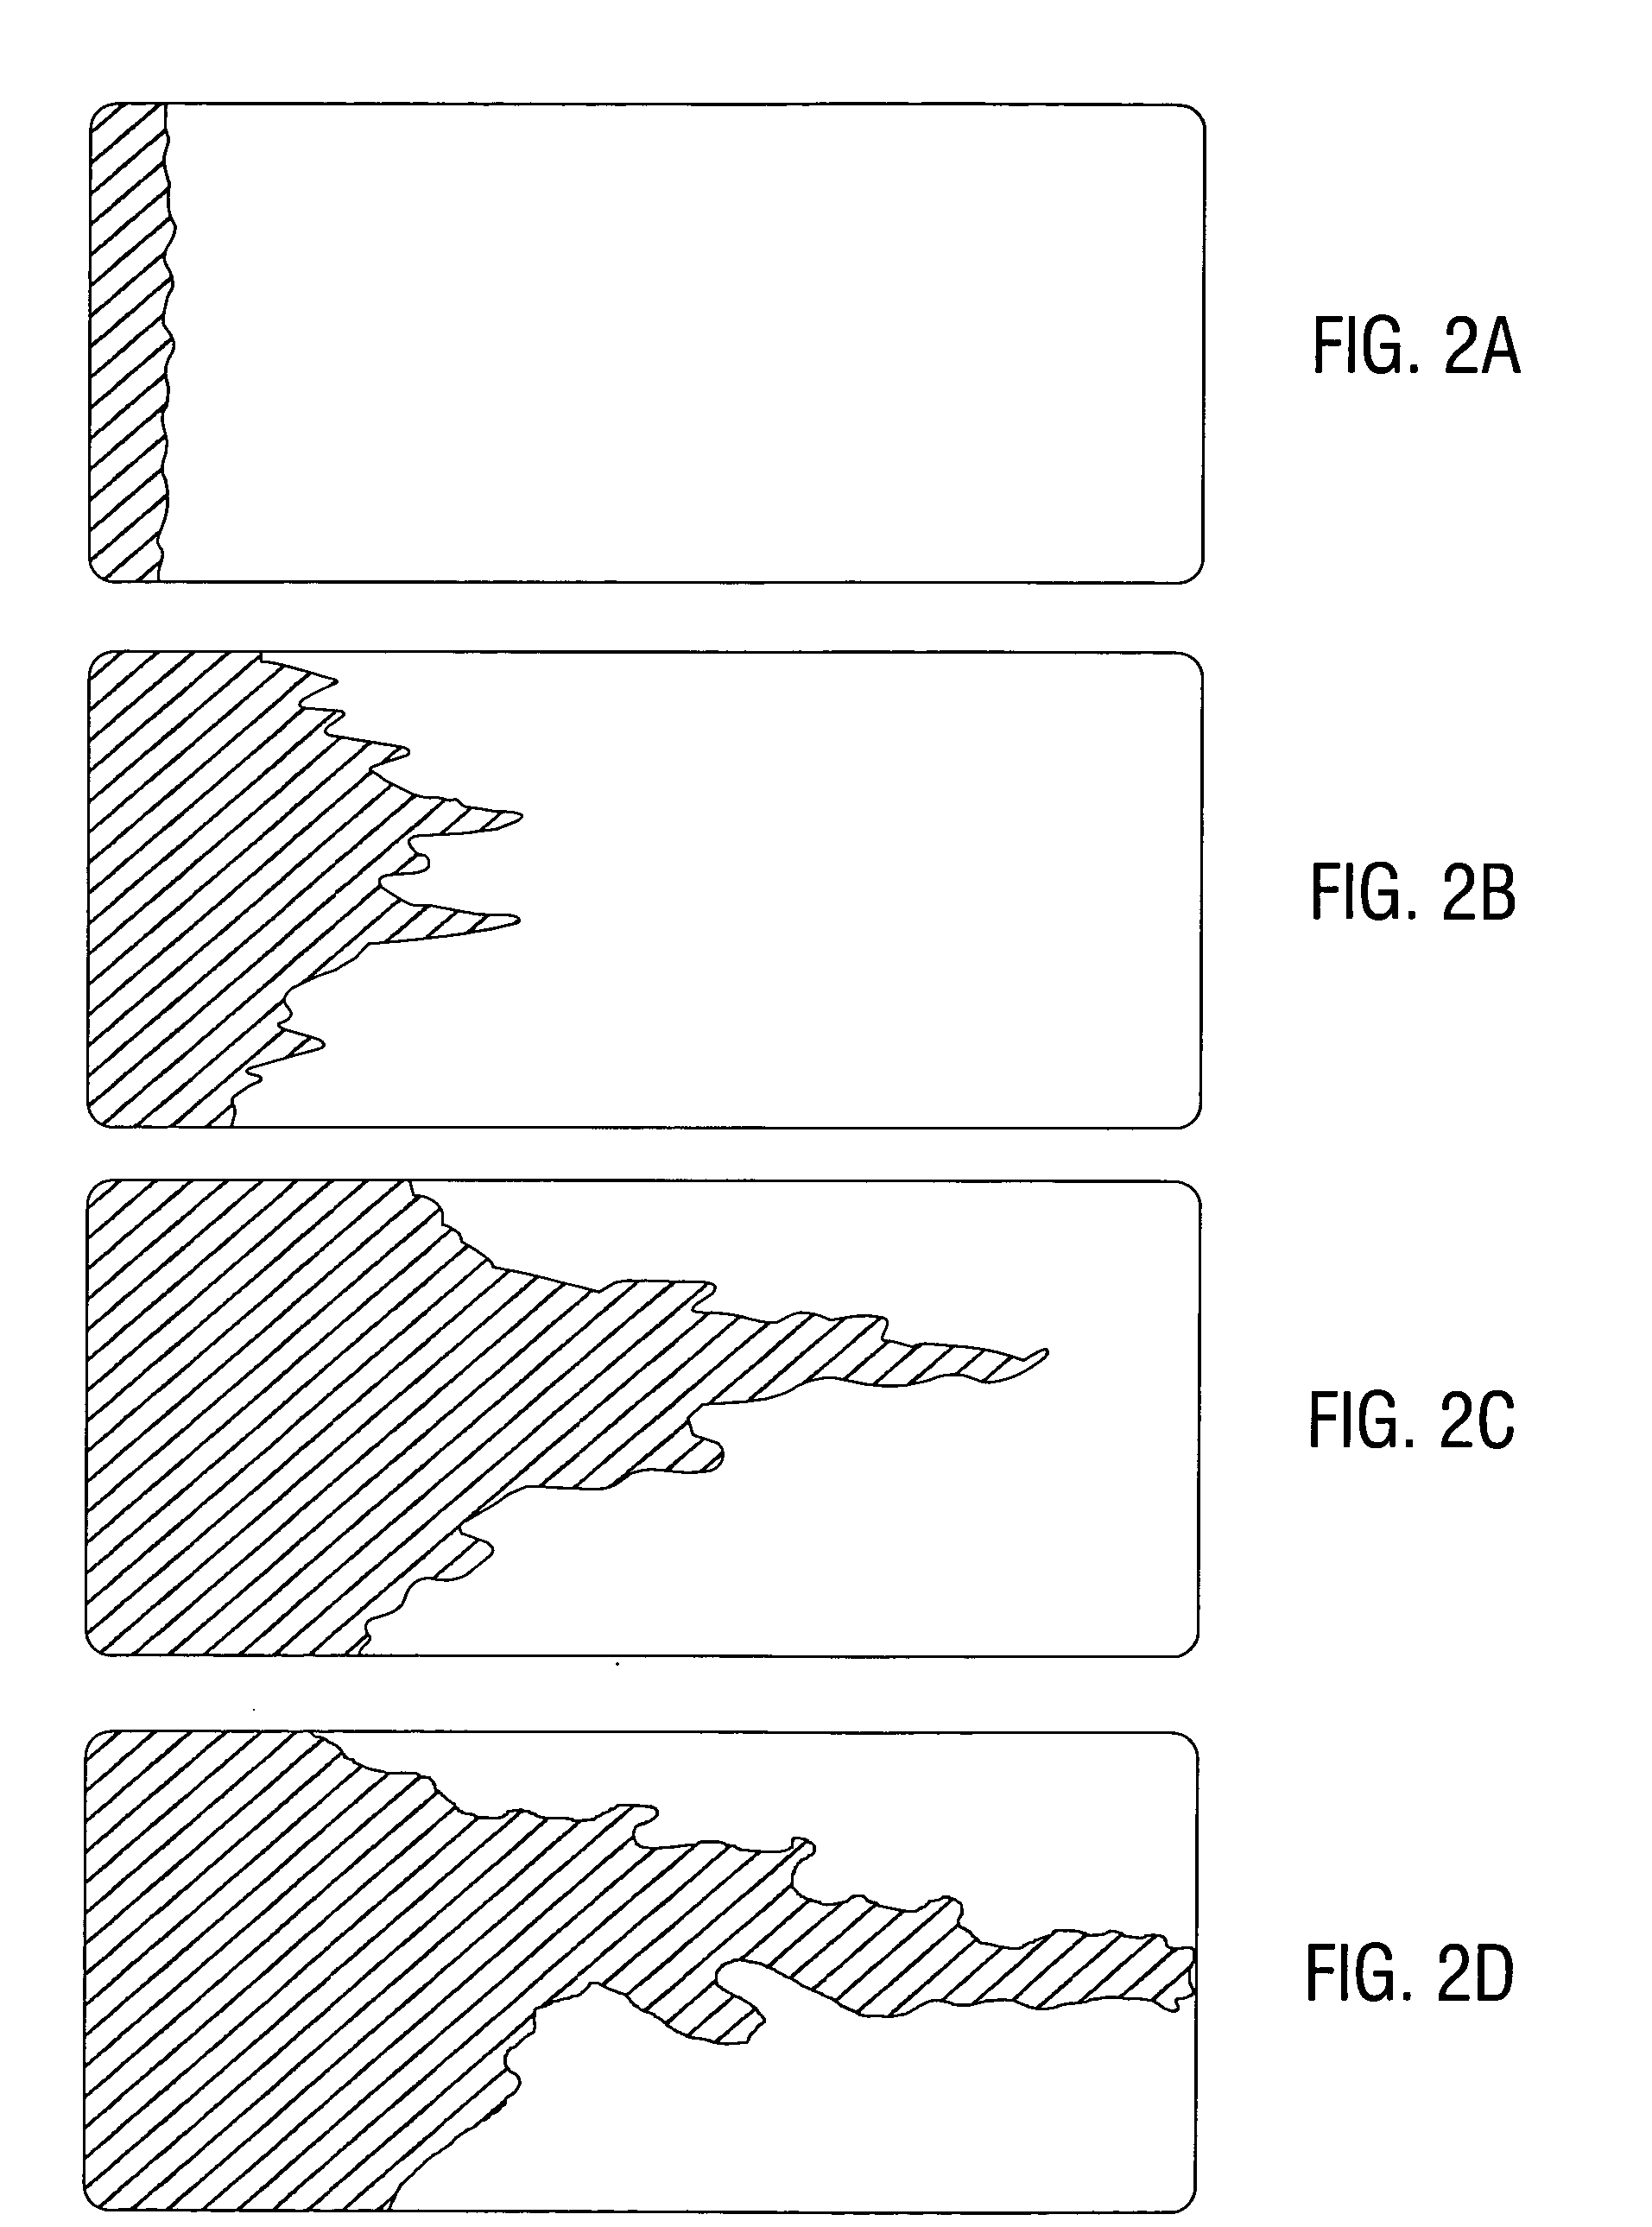 Methods and compositions for introducing conductive channels into a hydraulic fracturing treatment